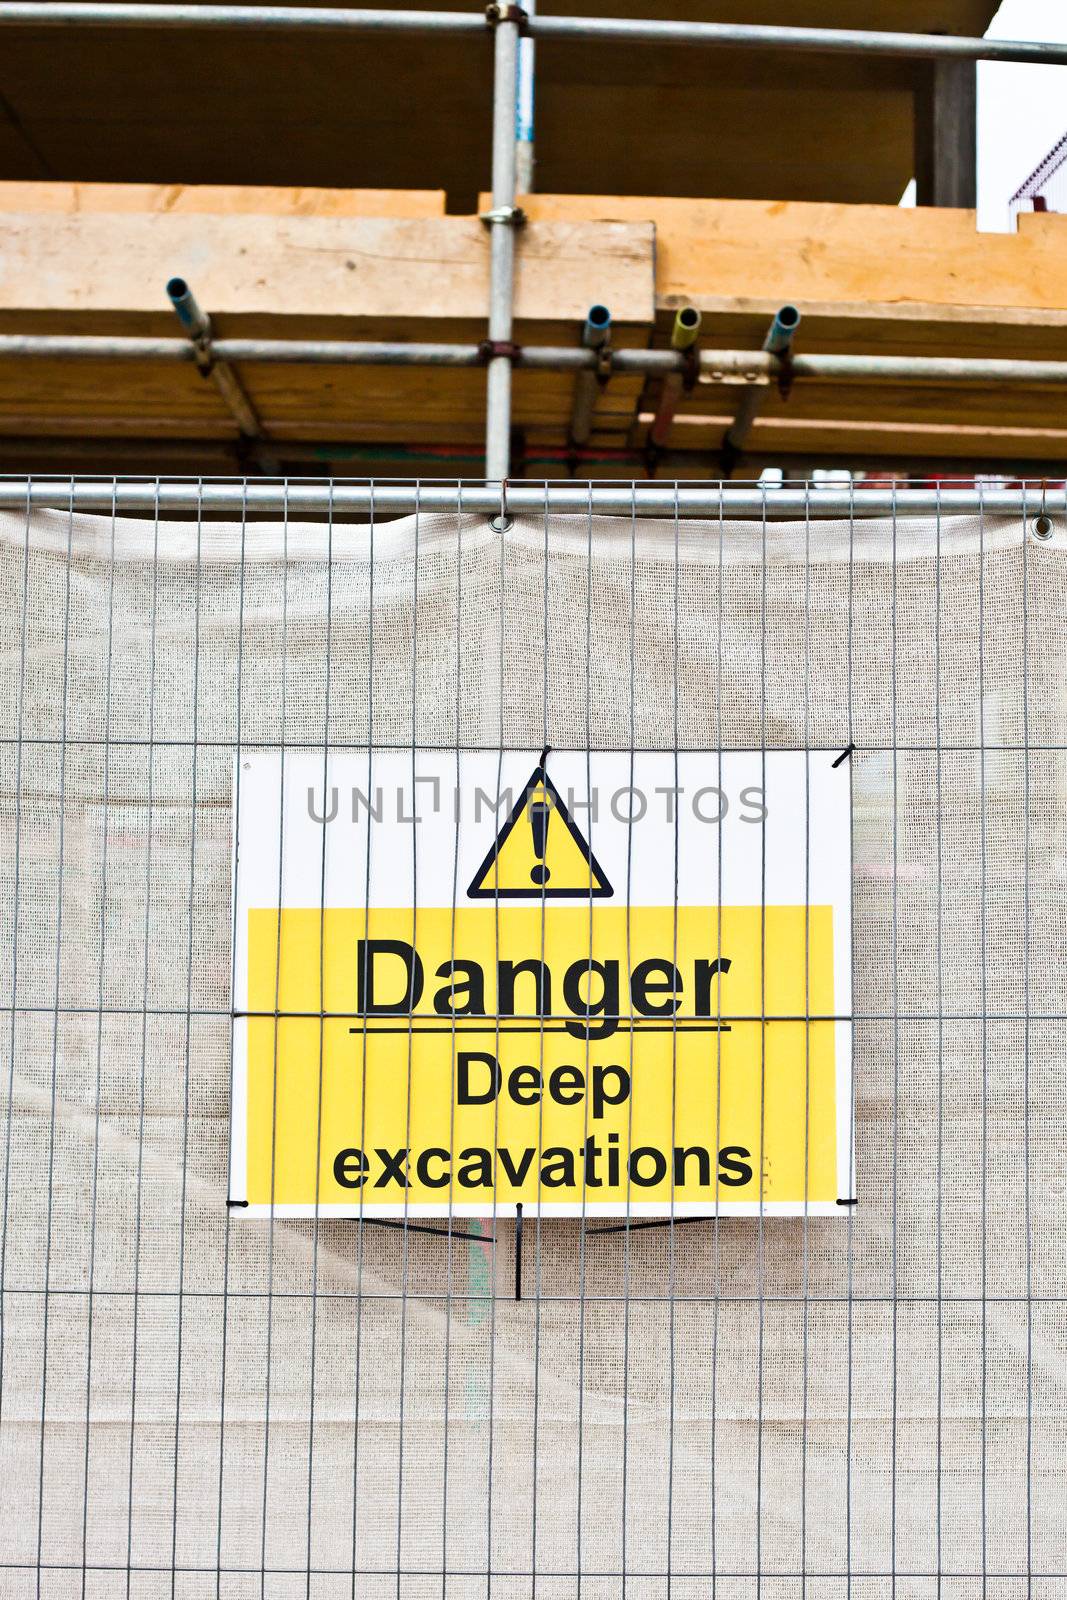 Warning sign about excavations at a construction site